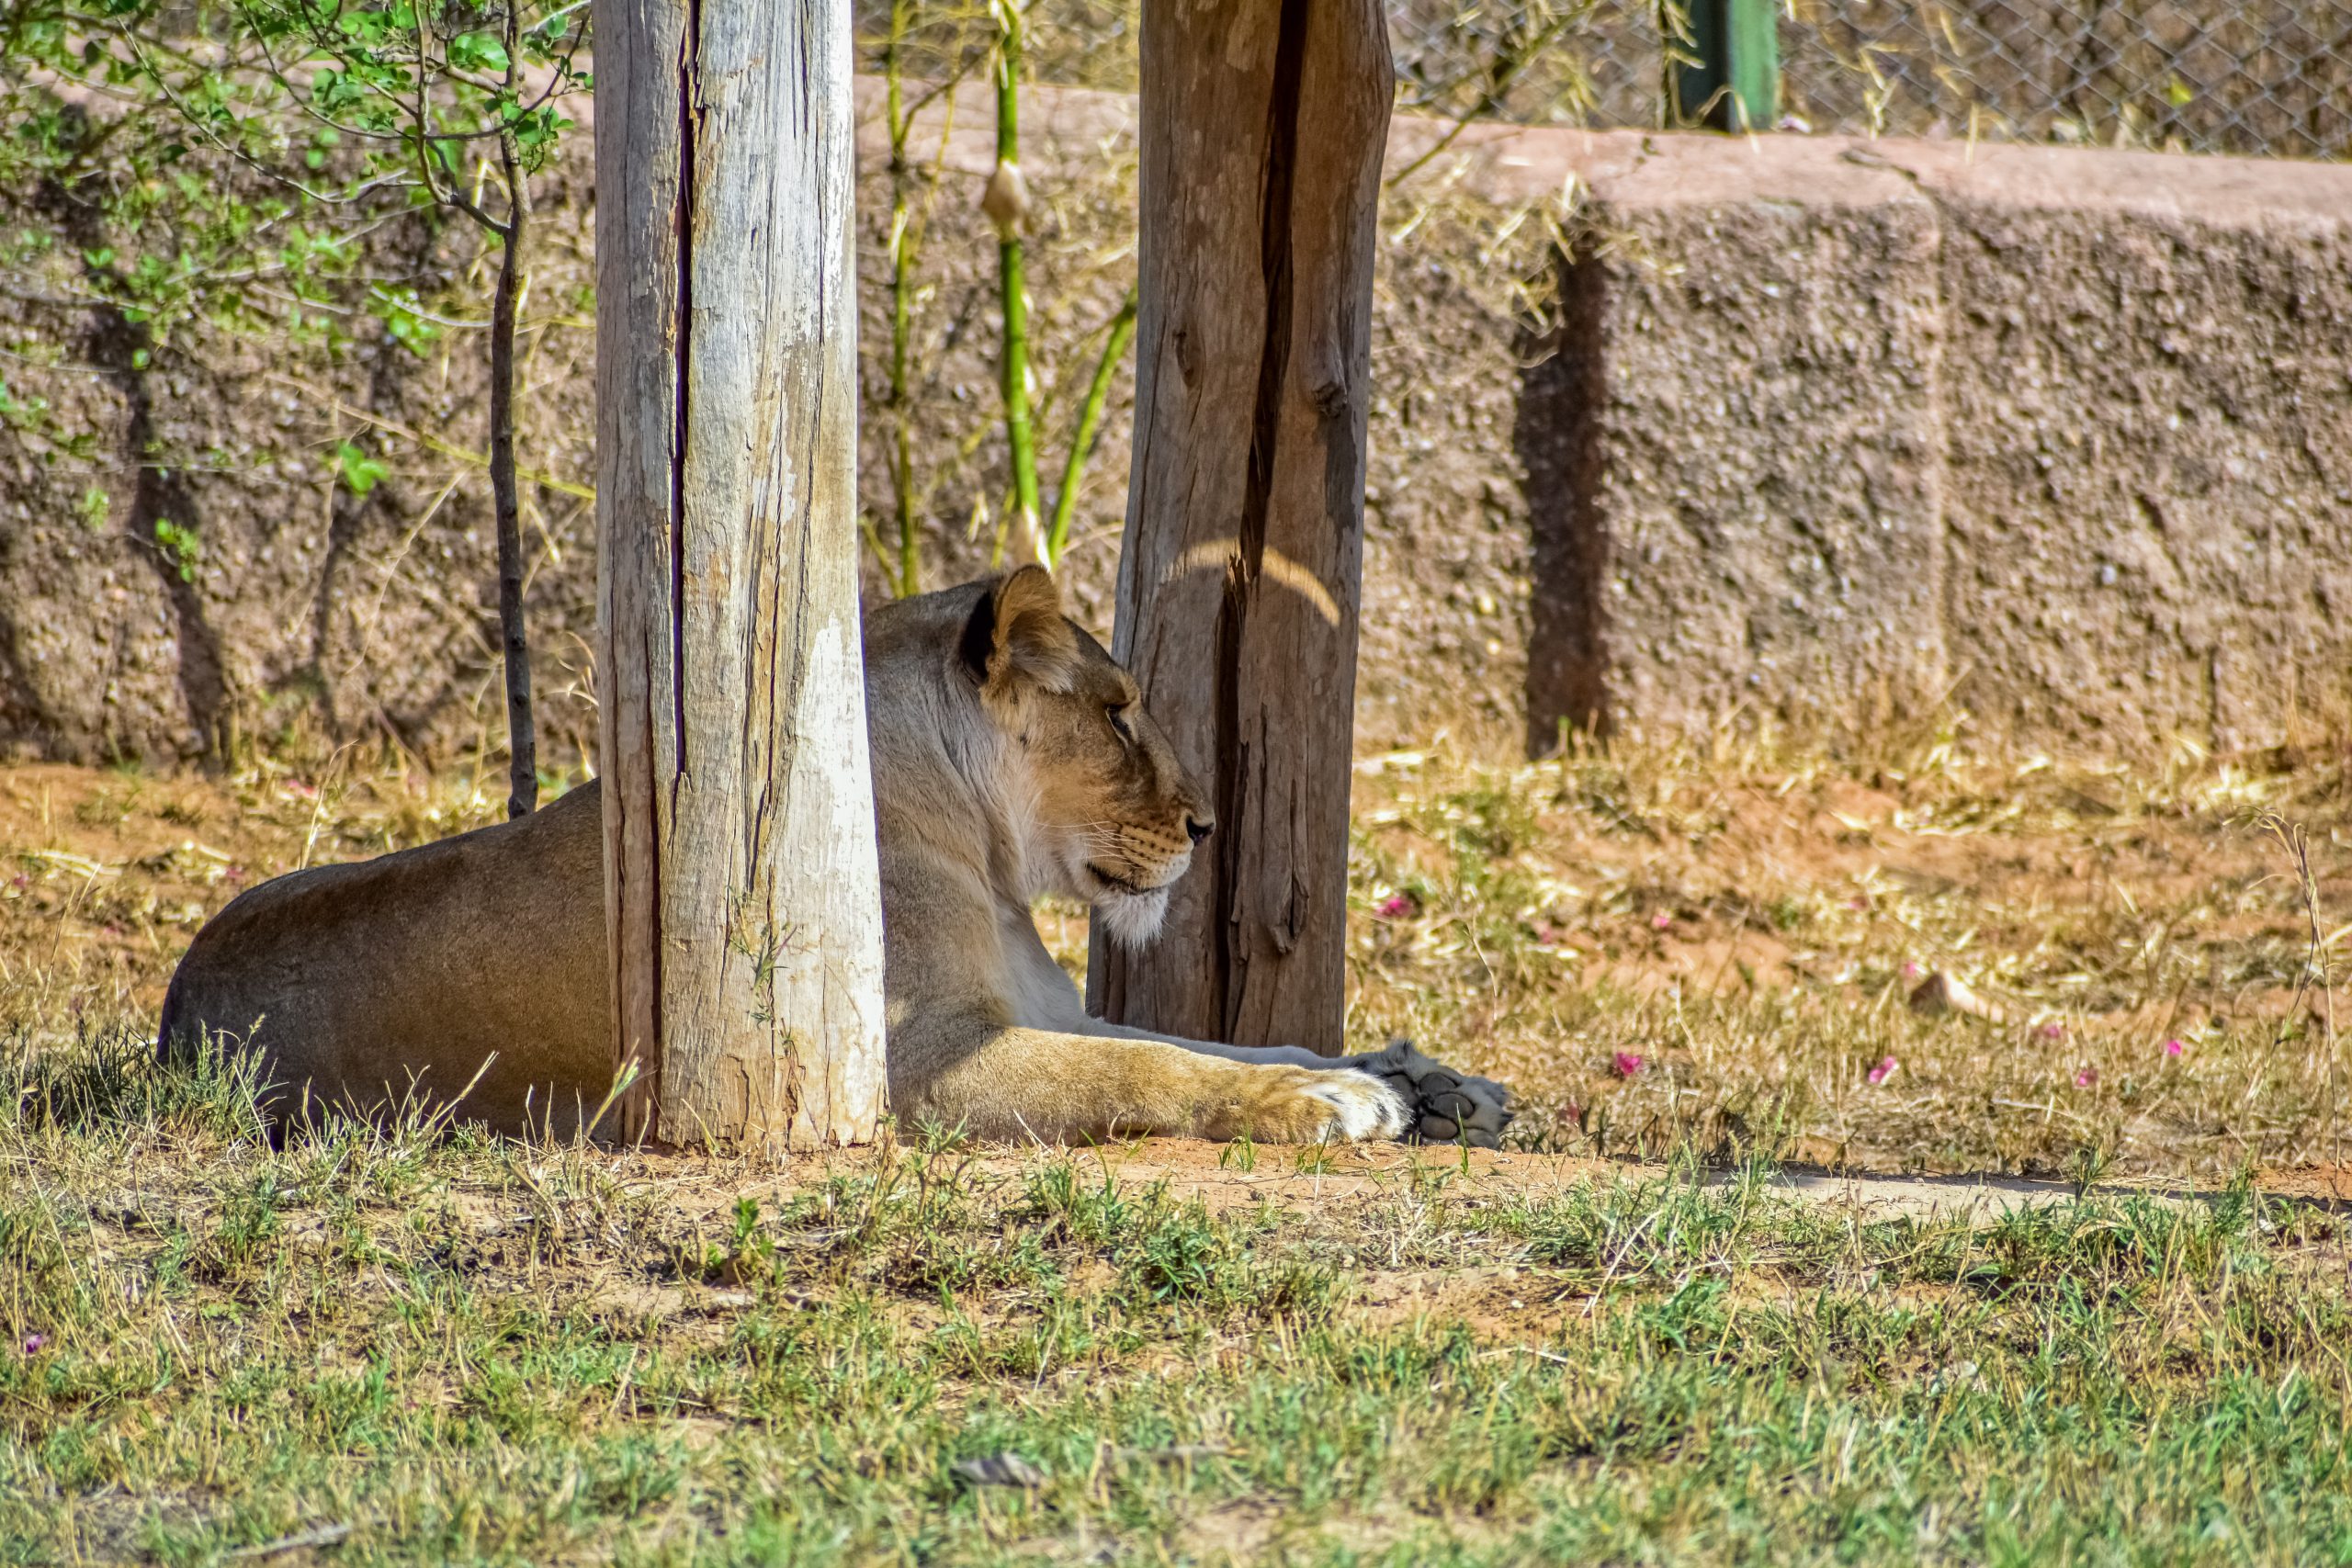 Asiatic lioness in a zoo